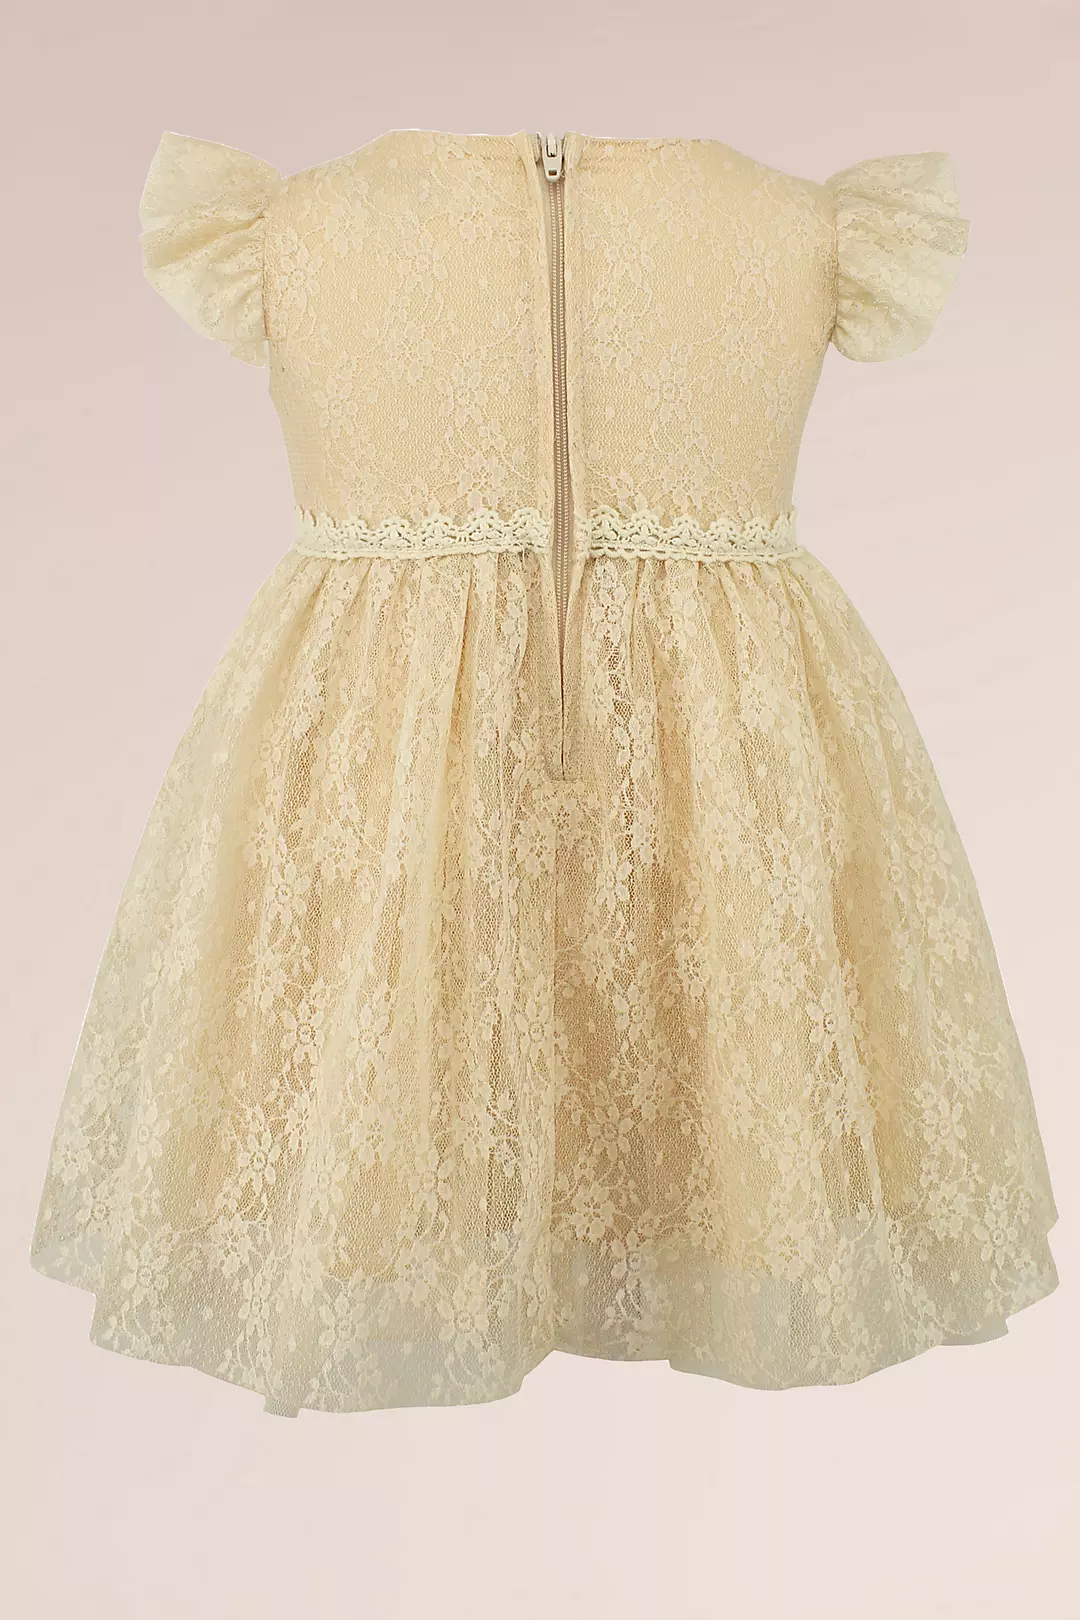 Floral Lace Flower Girl Dress with Cap Sleeves Image 2